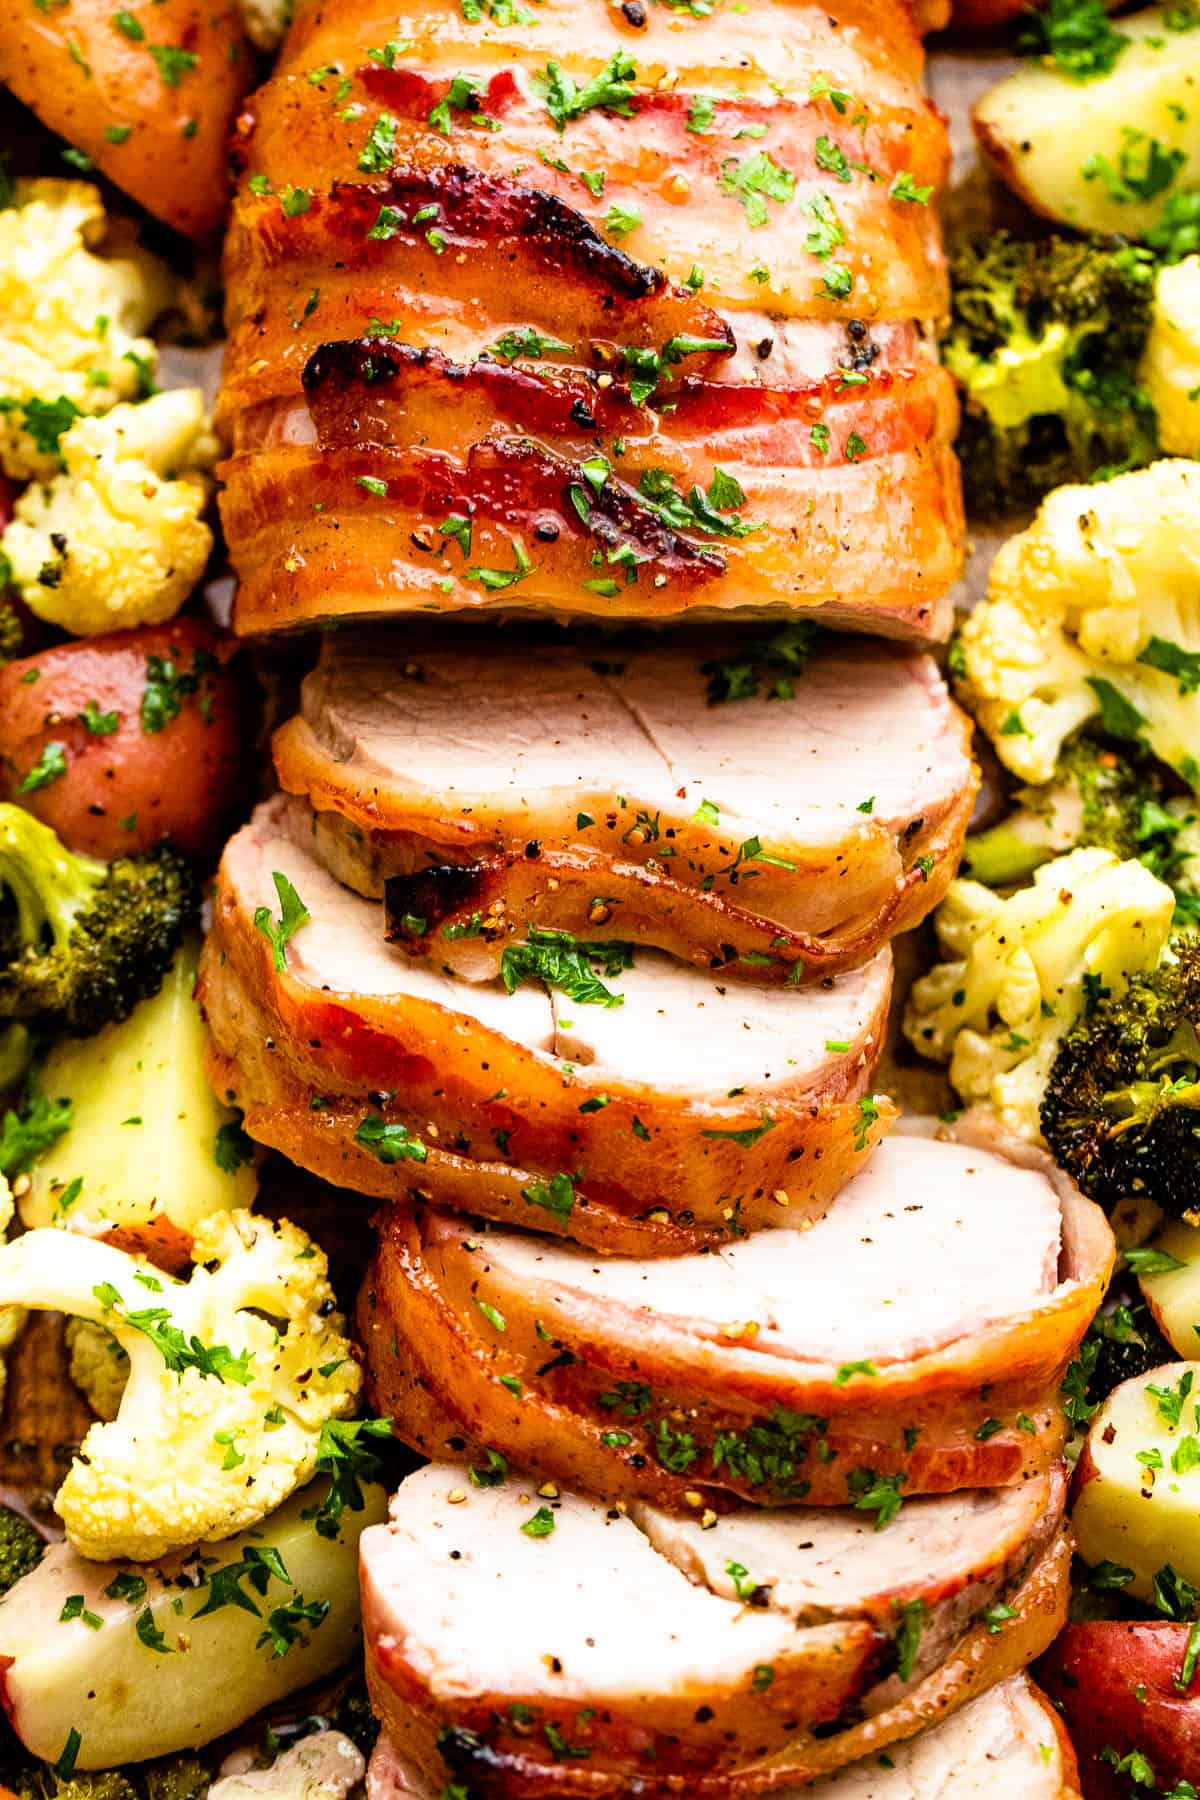 roasted pork tenderloin wrapped in bacon and vegetables spread around it